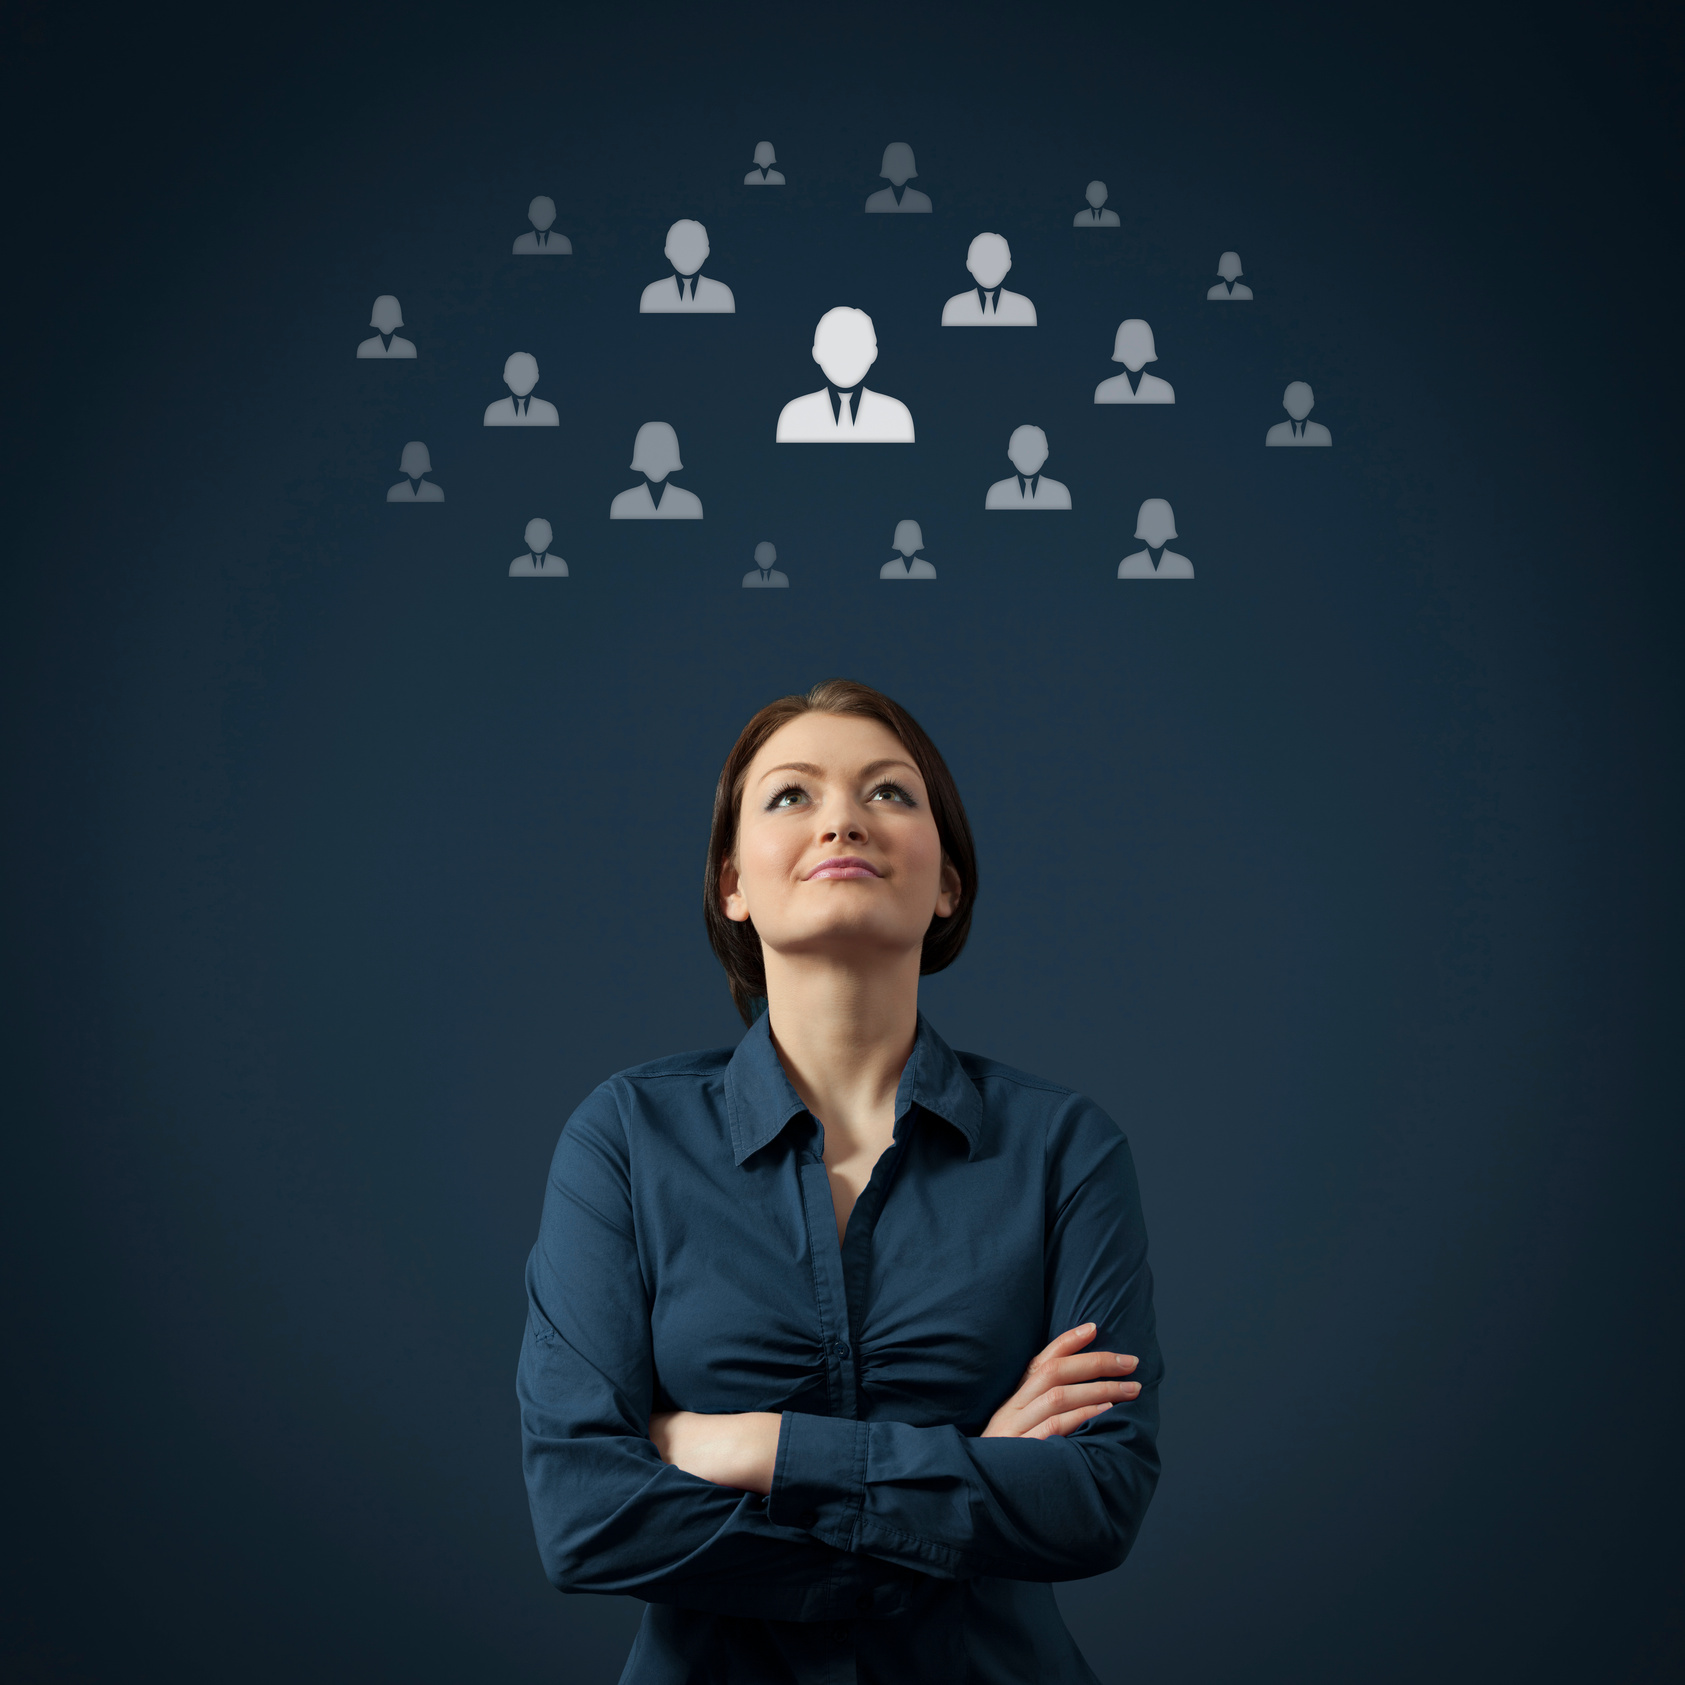 Human resources and CRM